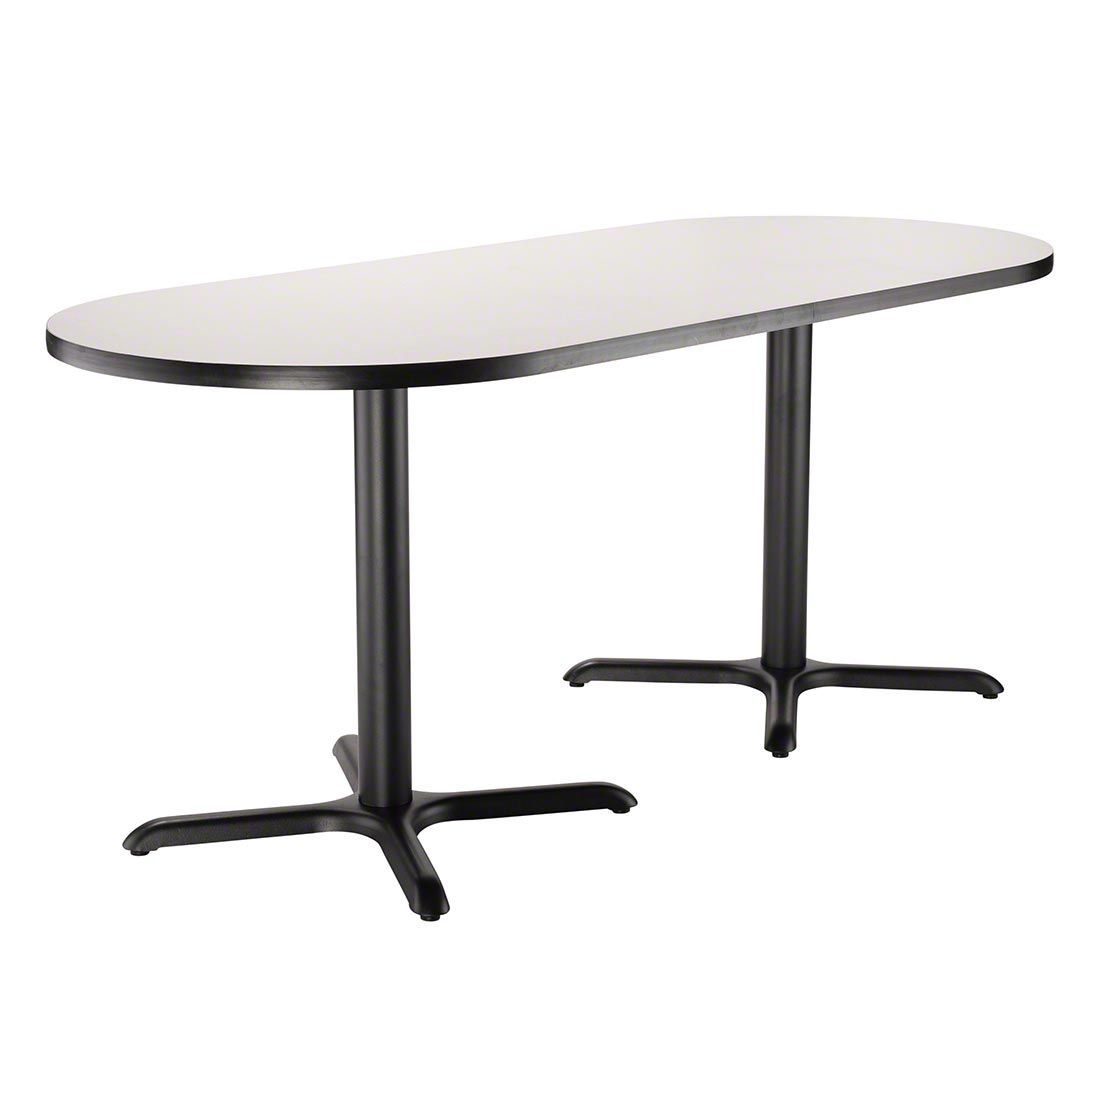 Nps® 30x72 Racetrack Café Table W/x Base, Hpl Top 30"h Ct43072xd | Stagedrop Pertaining To White T Base Seminar Coffee Tables (View 8 of 15)